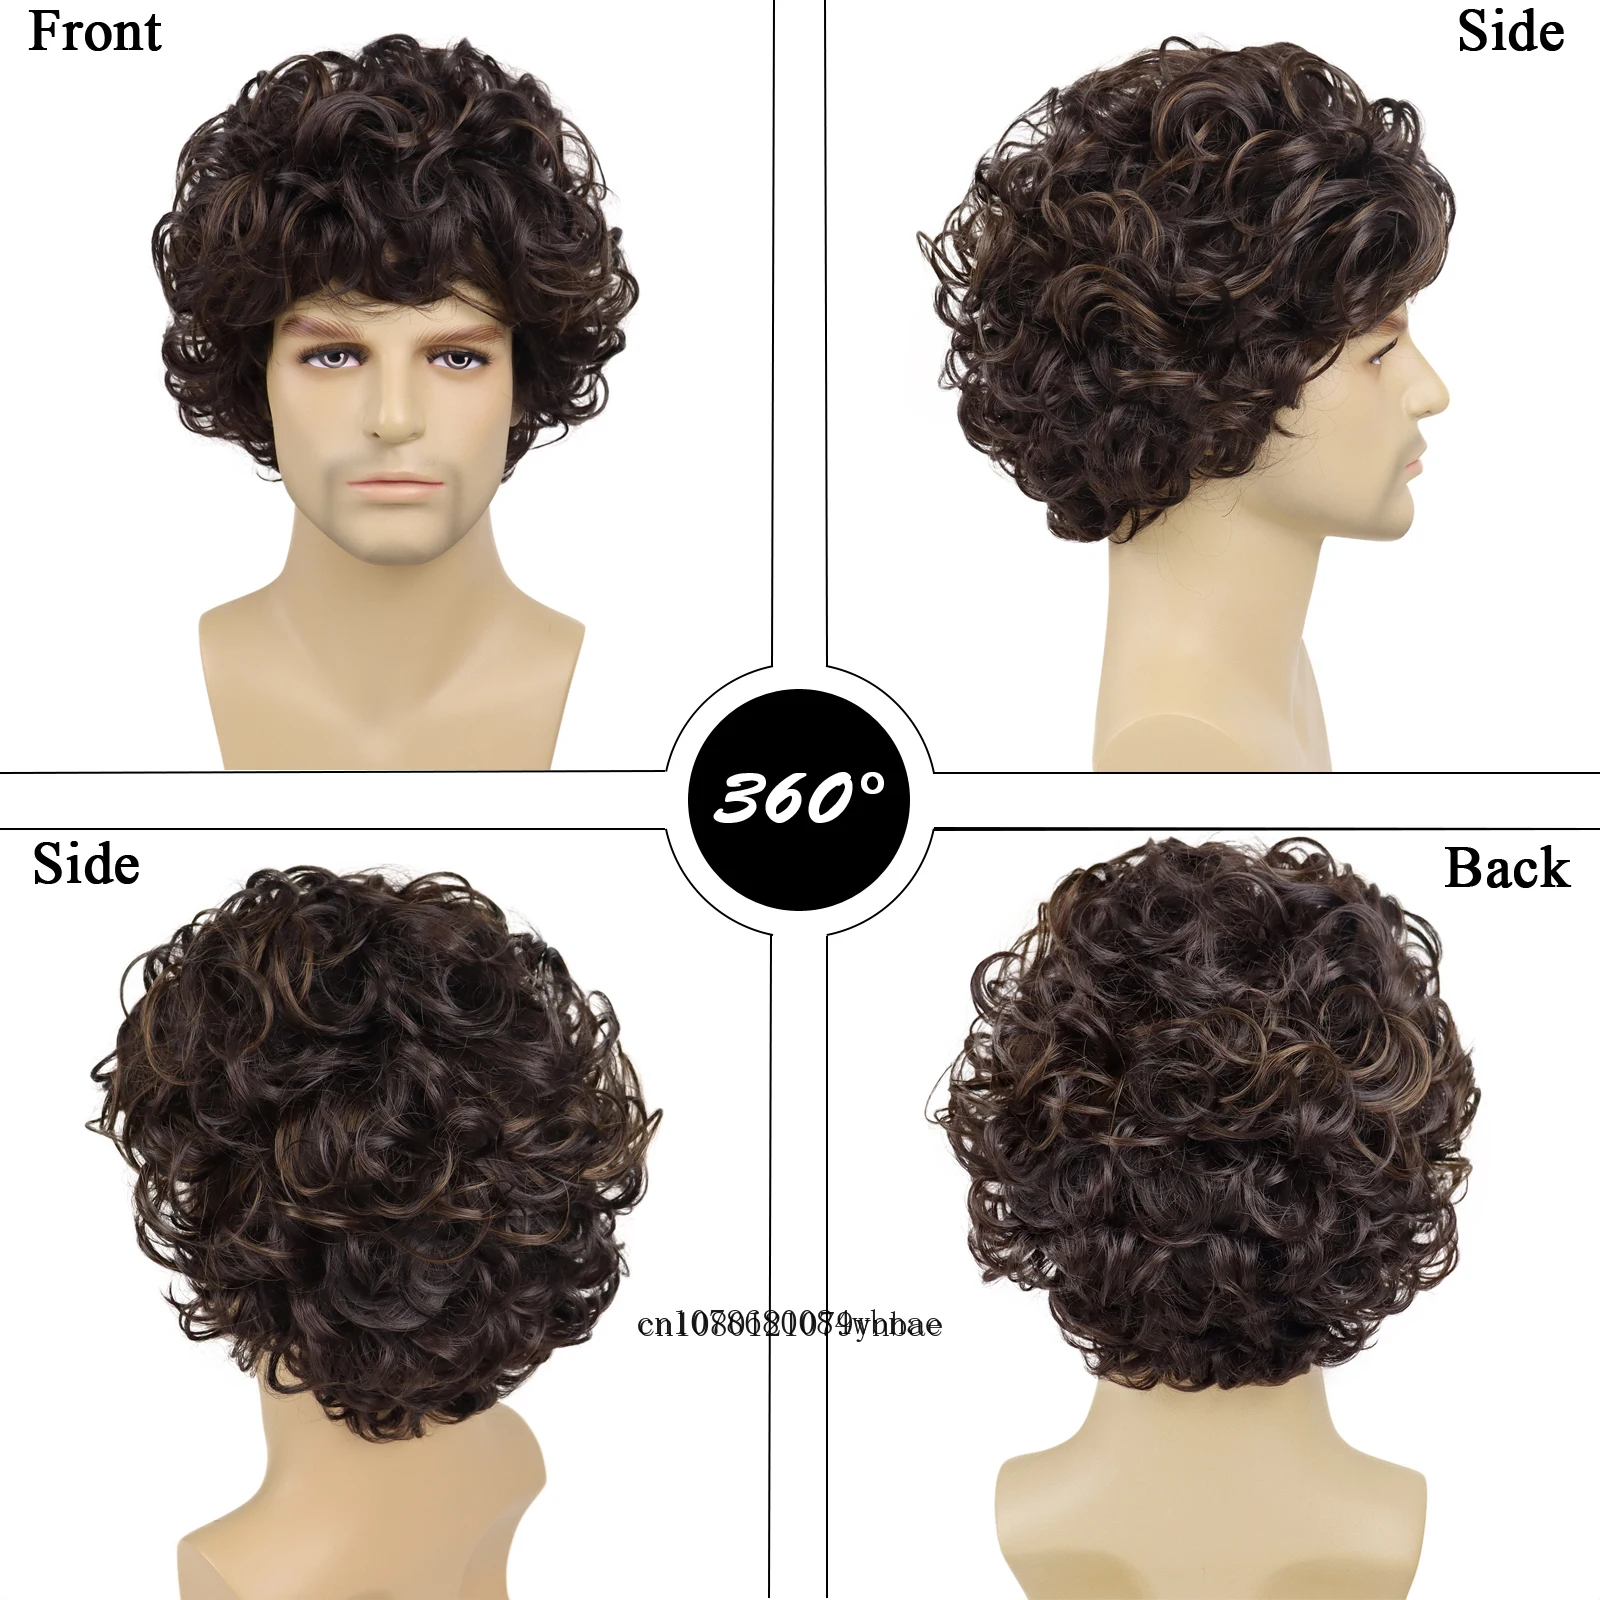 Trendy Short Curly Wigs Synthetic Fiber for Men Mix Brown Color Hair Replacement Wig Natural Hairstyles Daily Costume Cosplay